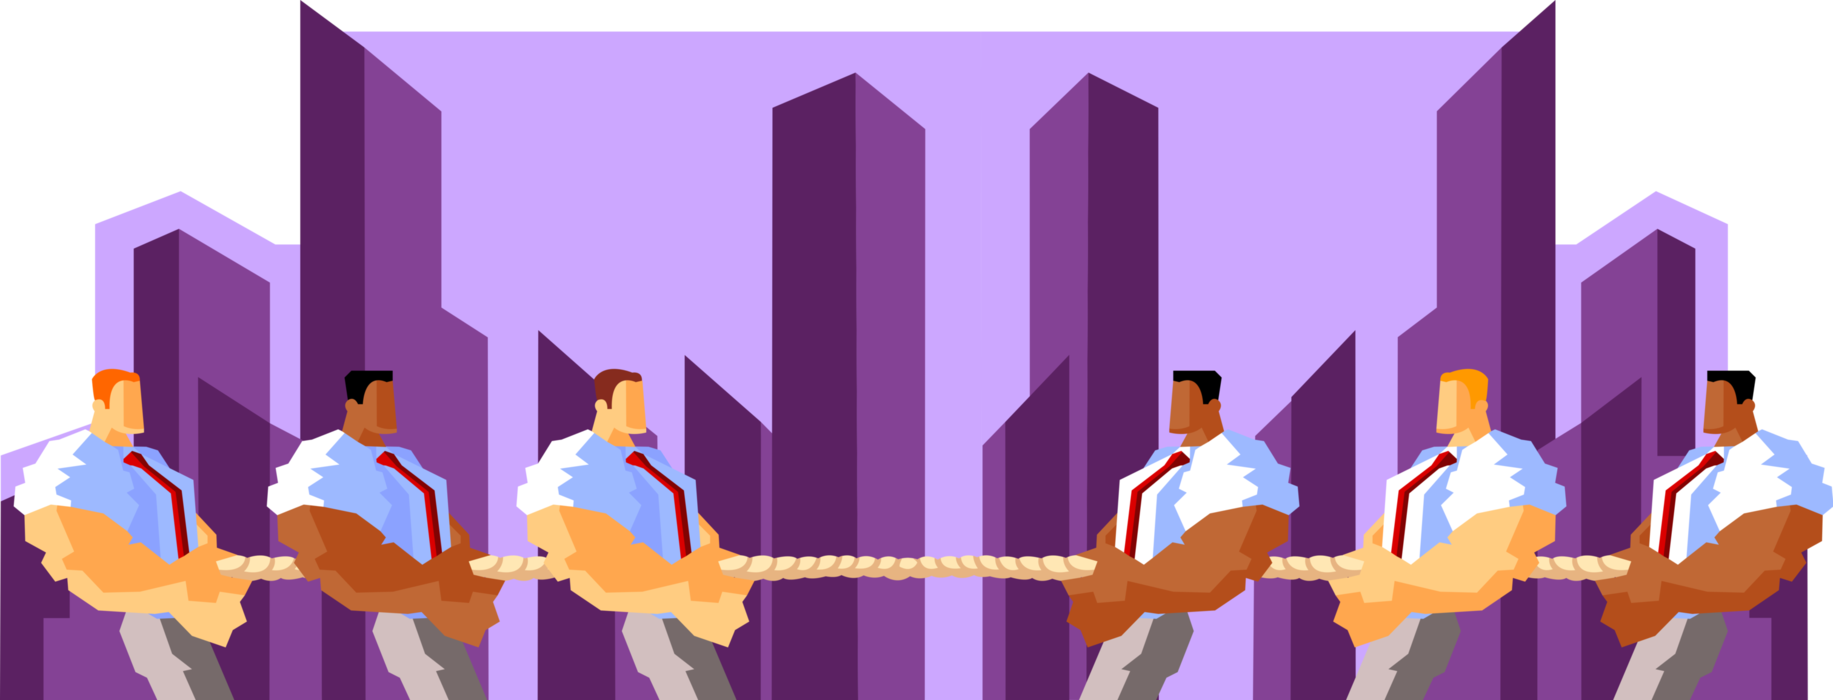 Vector Illustration of Powerful Businessman with Jacked Biceps and Forearms in Competitive Tug-of-War